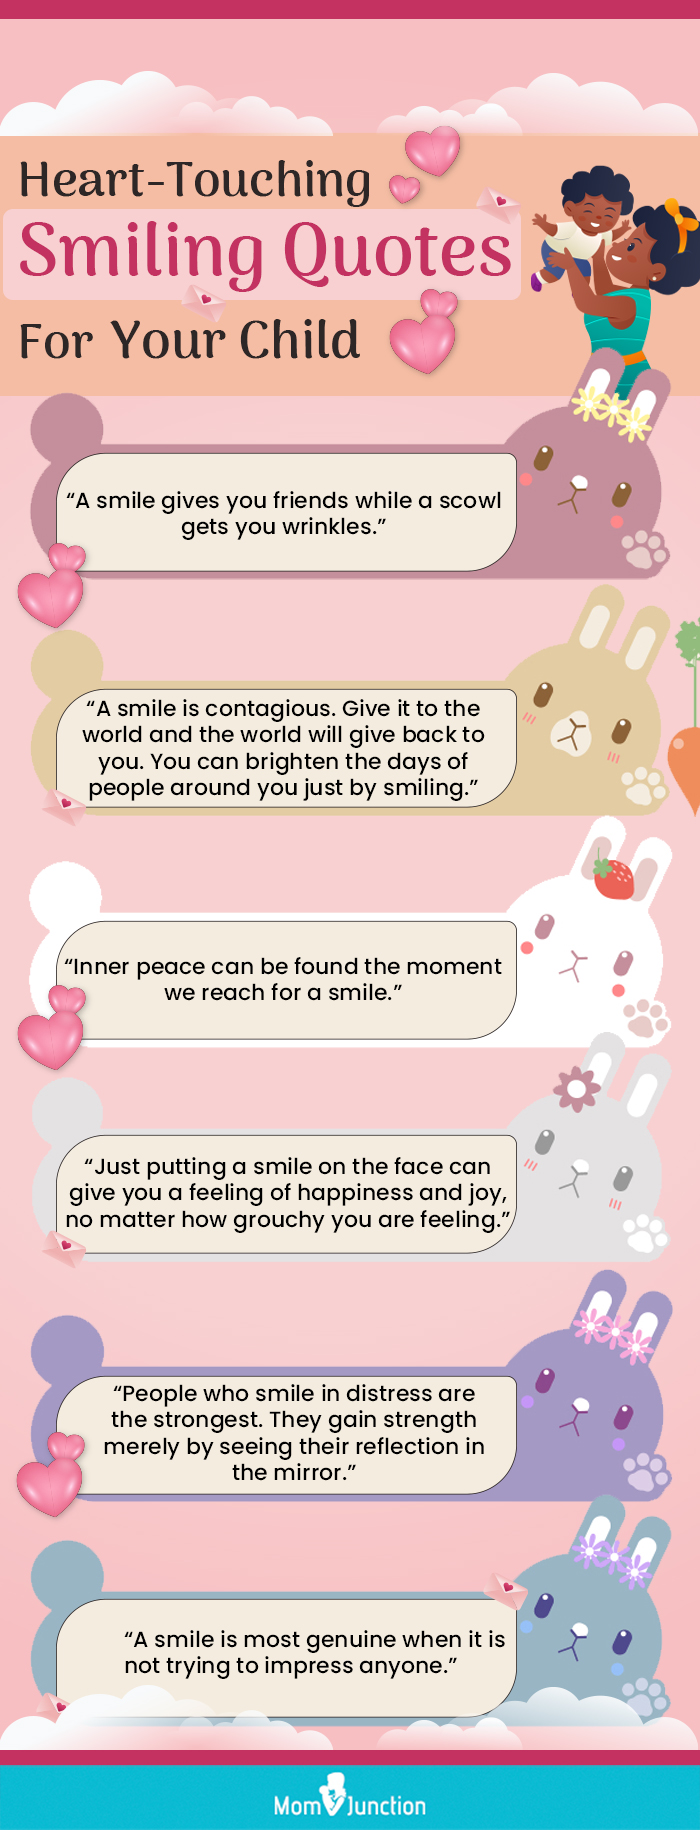 heart touching smiling quotes for your child (infographic)